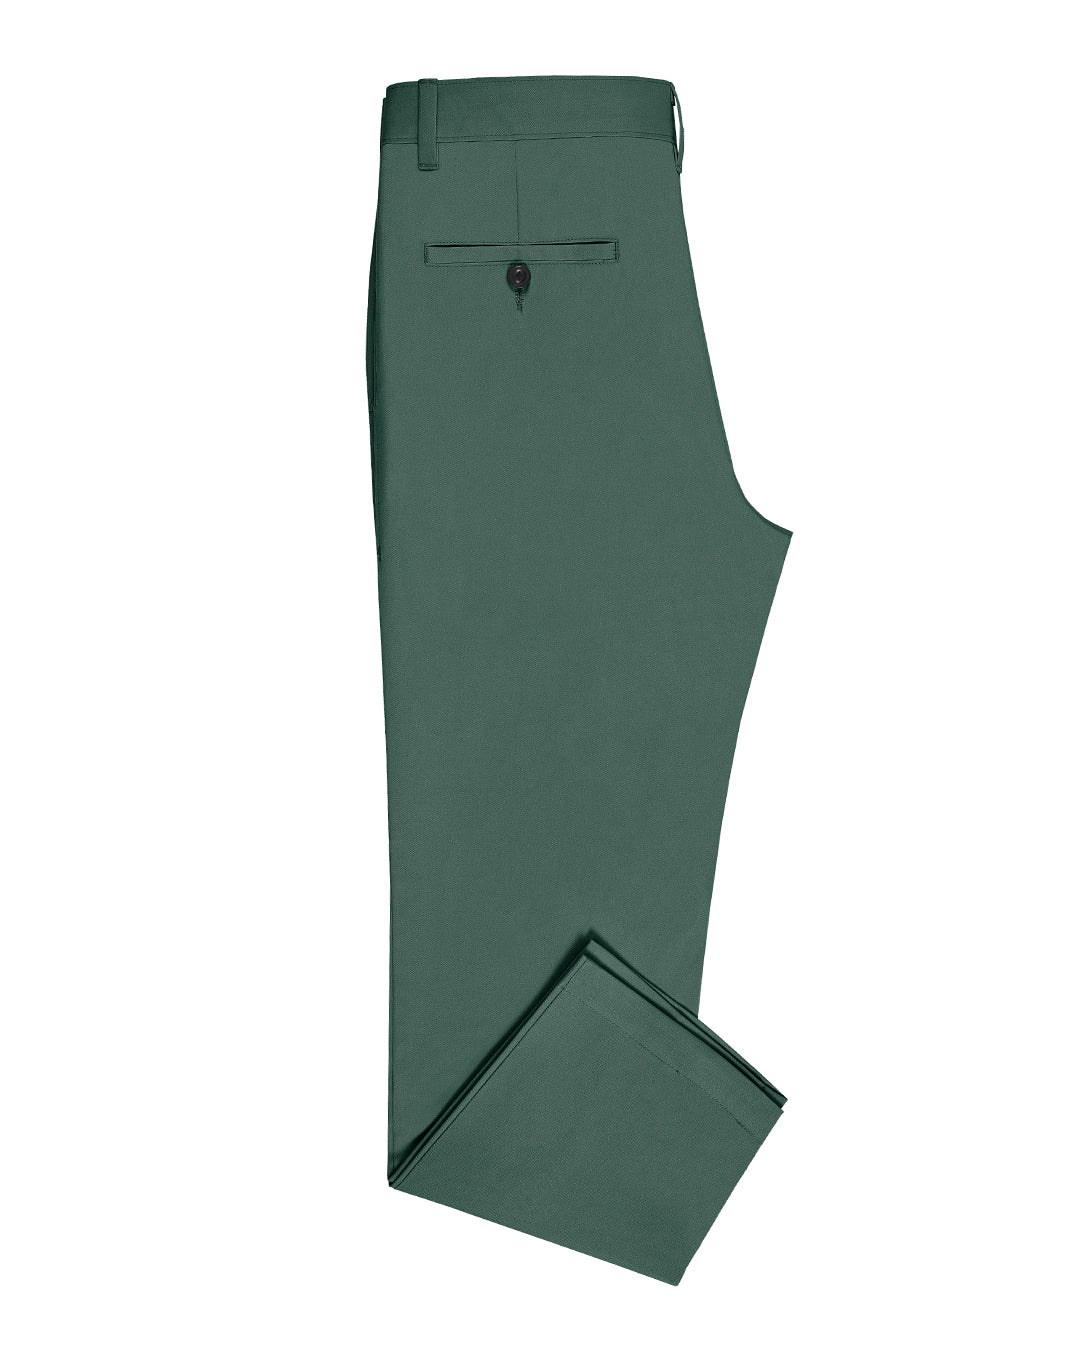 Side view of custom Genoa Chino pants for men by Luxire in fern green